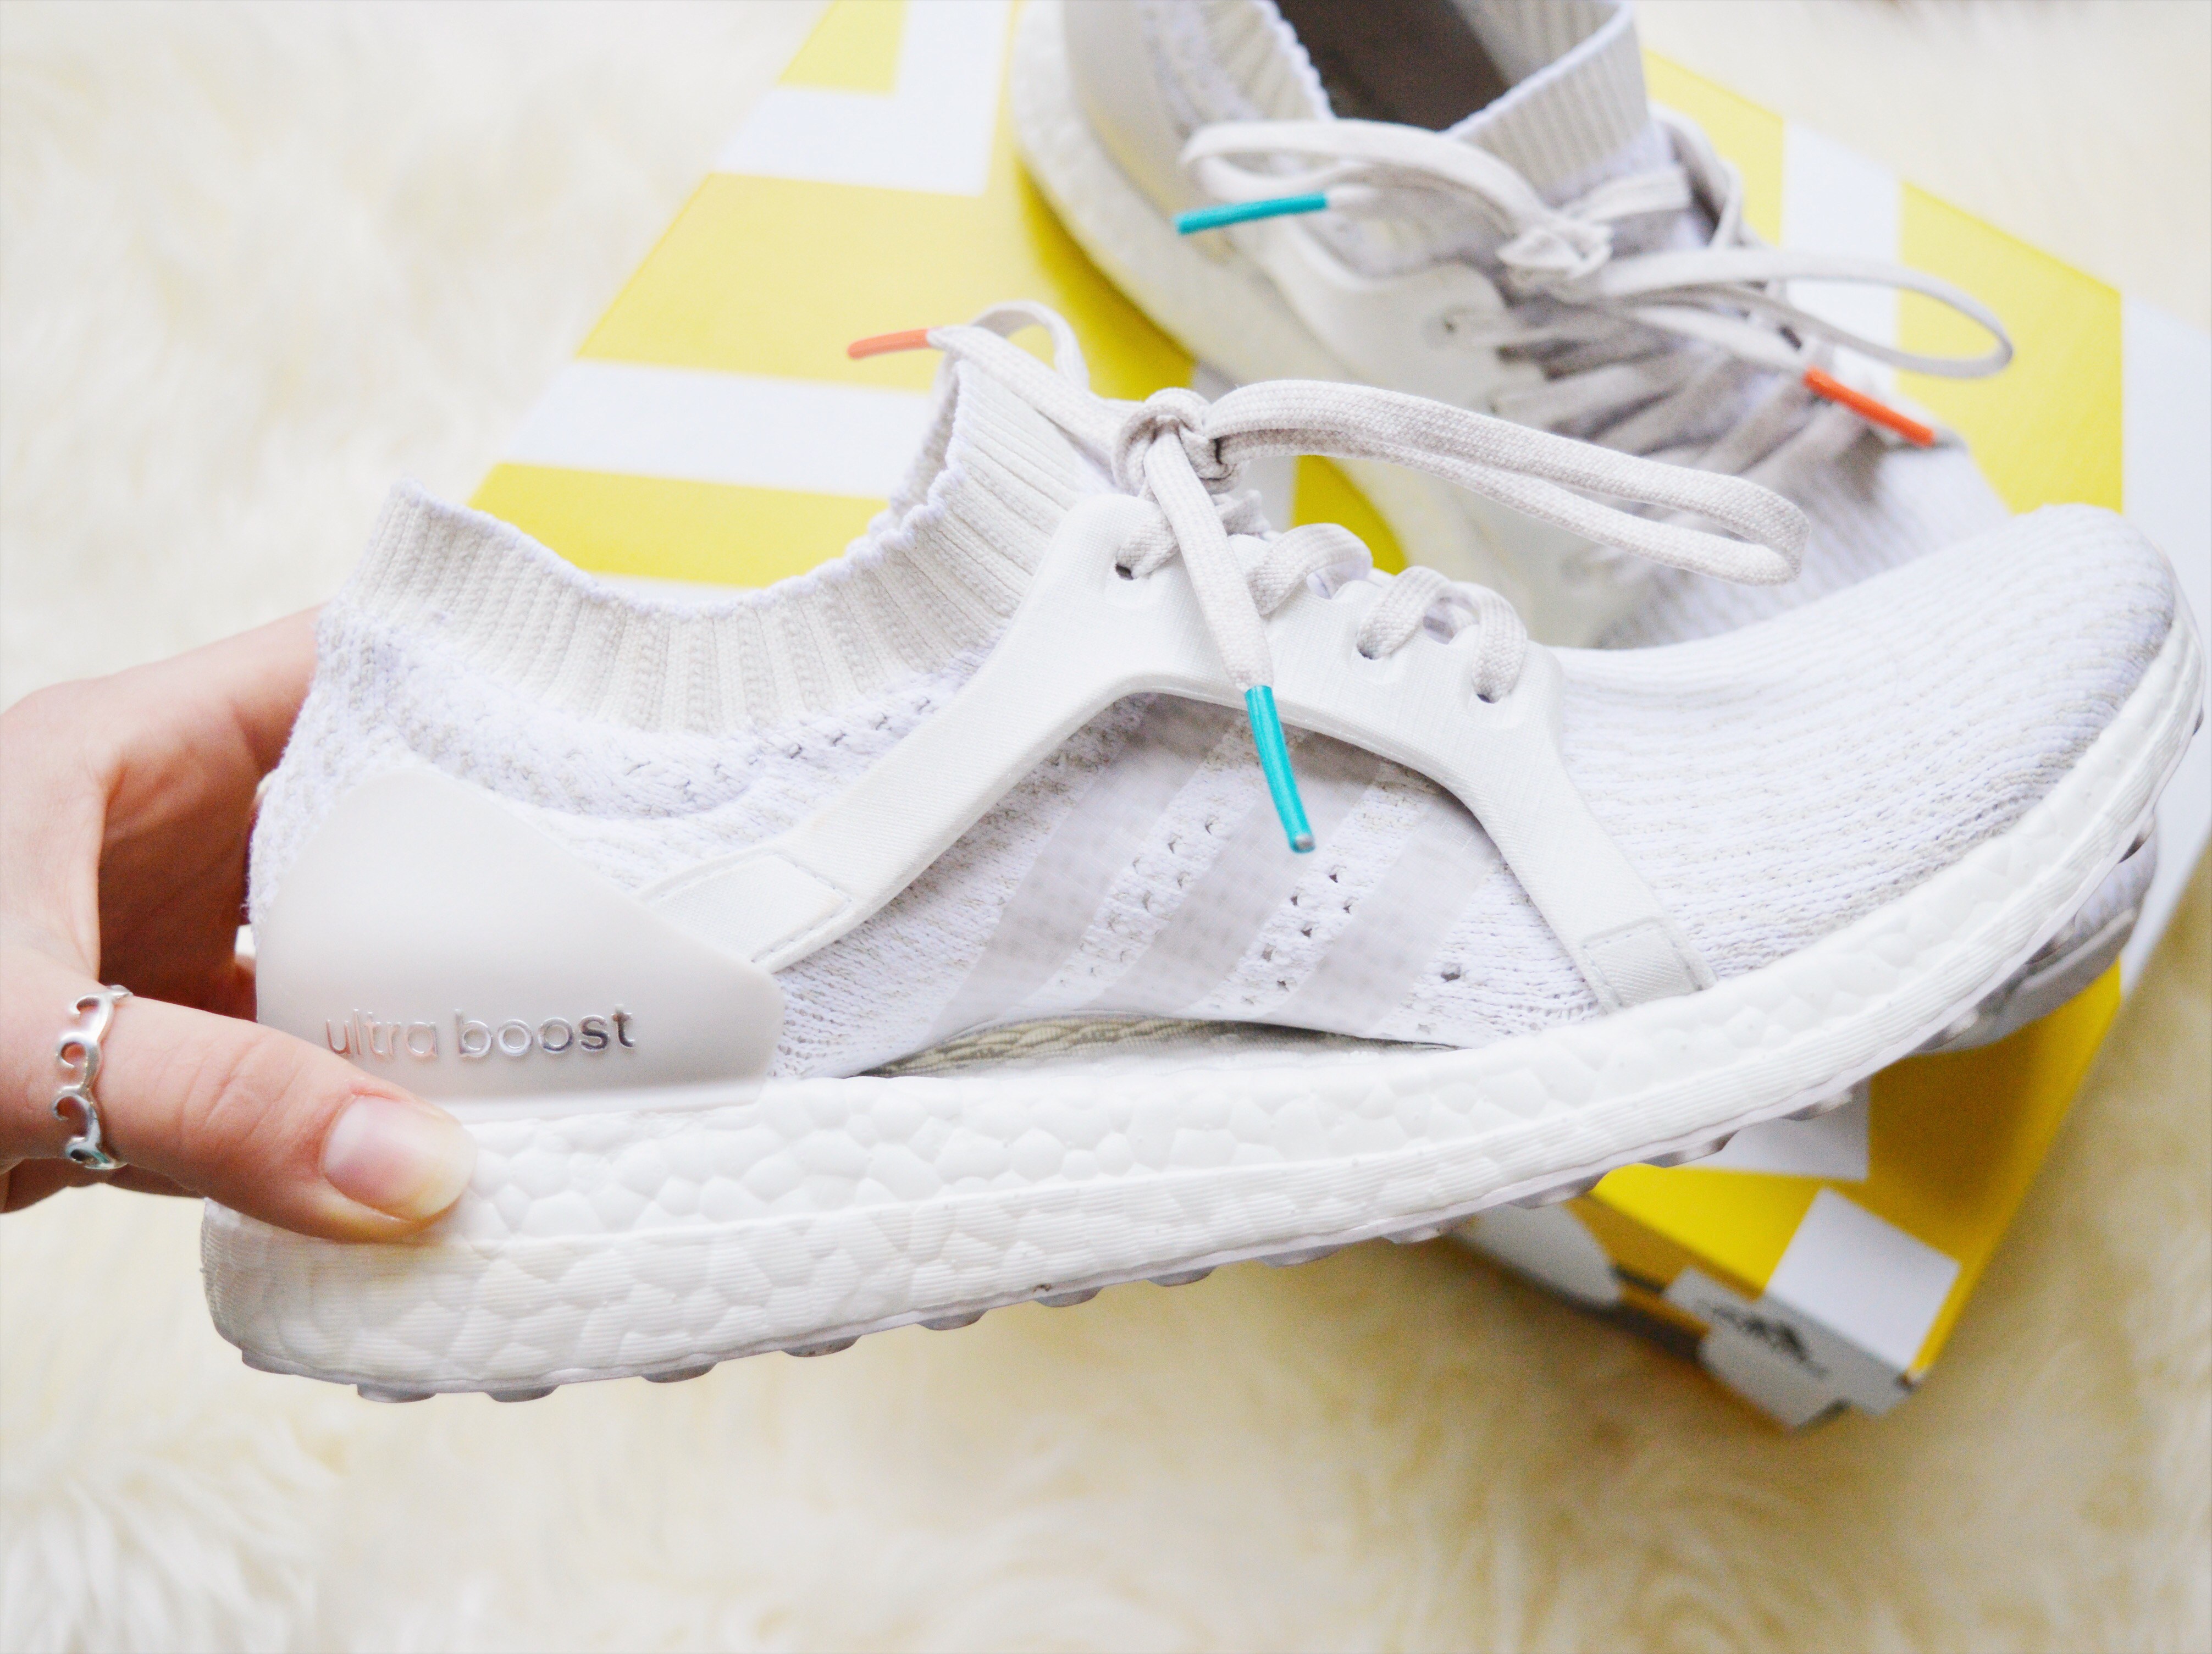 Does Adidas by Stella McCartney Live Up 